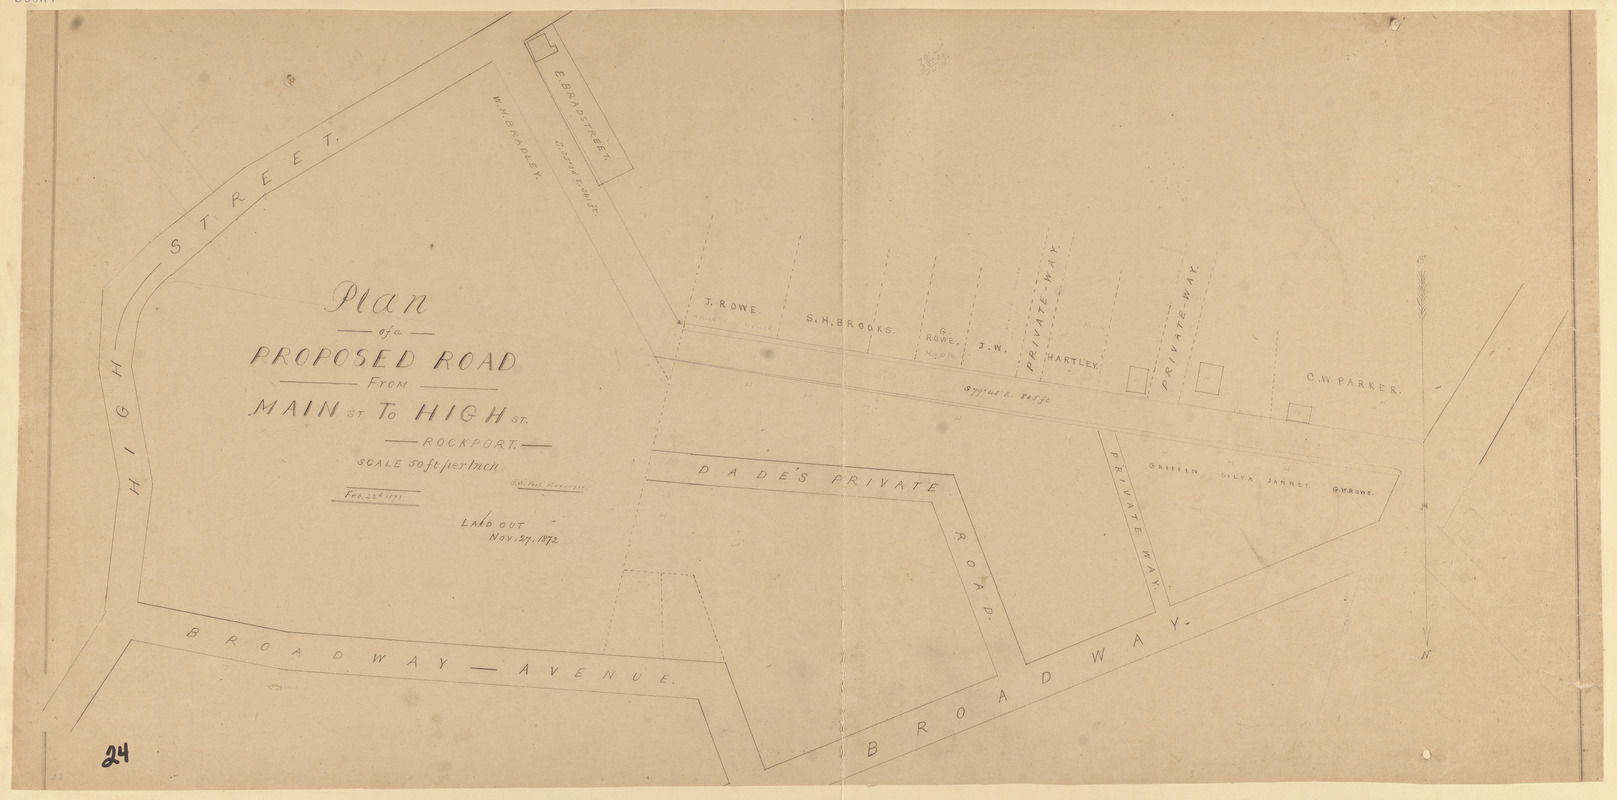 Plan of a proposed road from Main to High St., Rockport